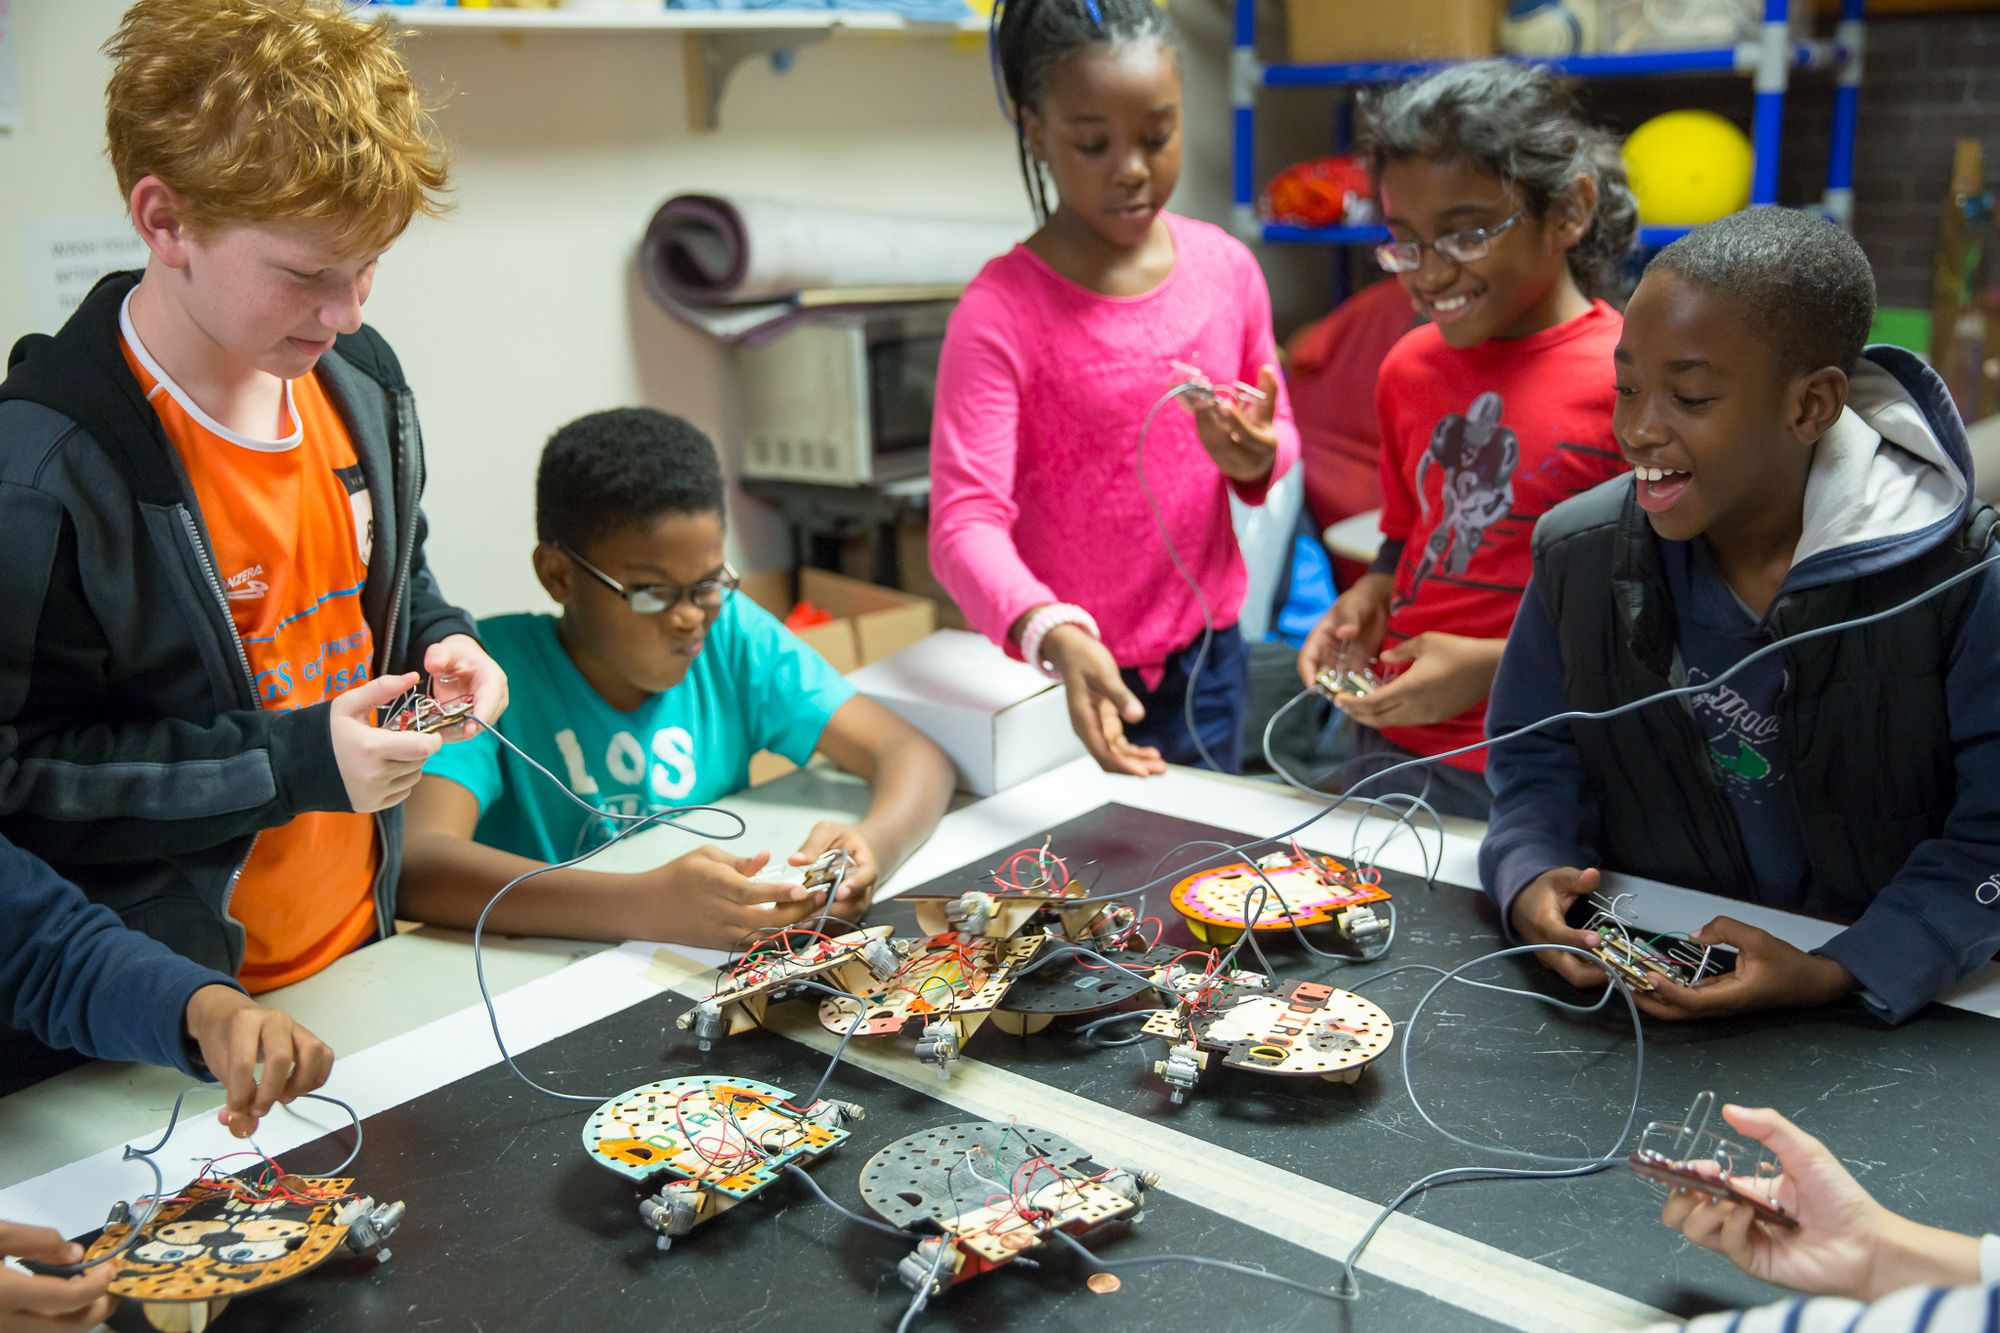 Video Game Design, Sports, Movie-Making And More At LIU Brooklyn Children’s Academy (Sponsored)